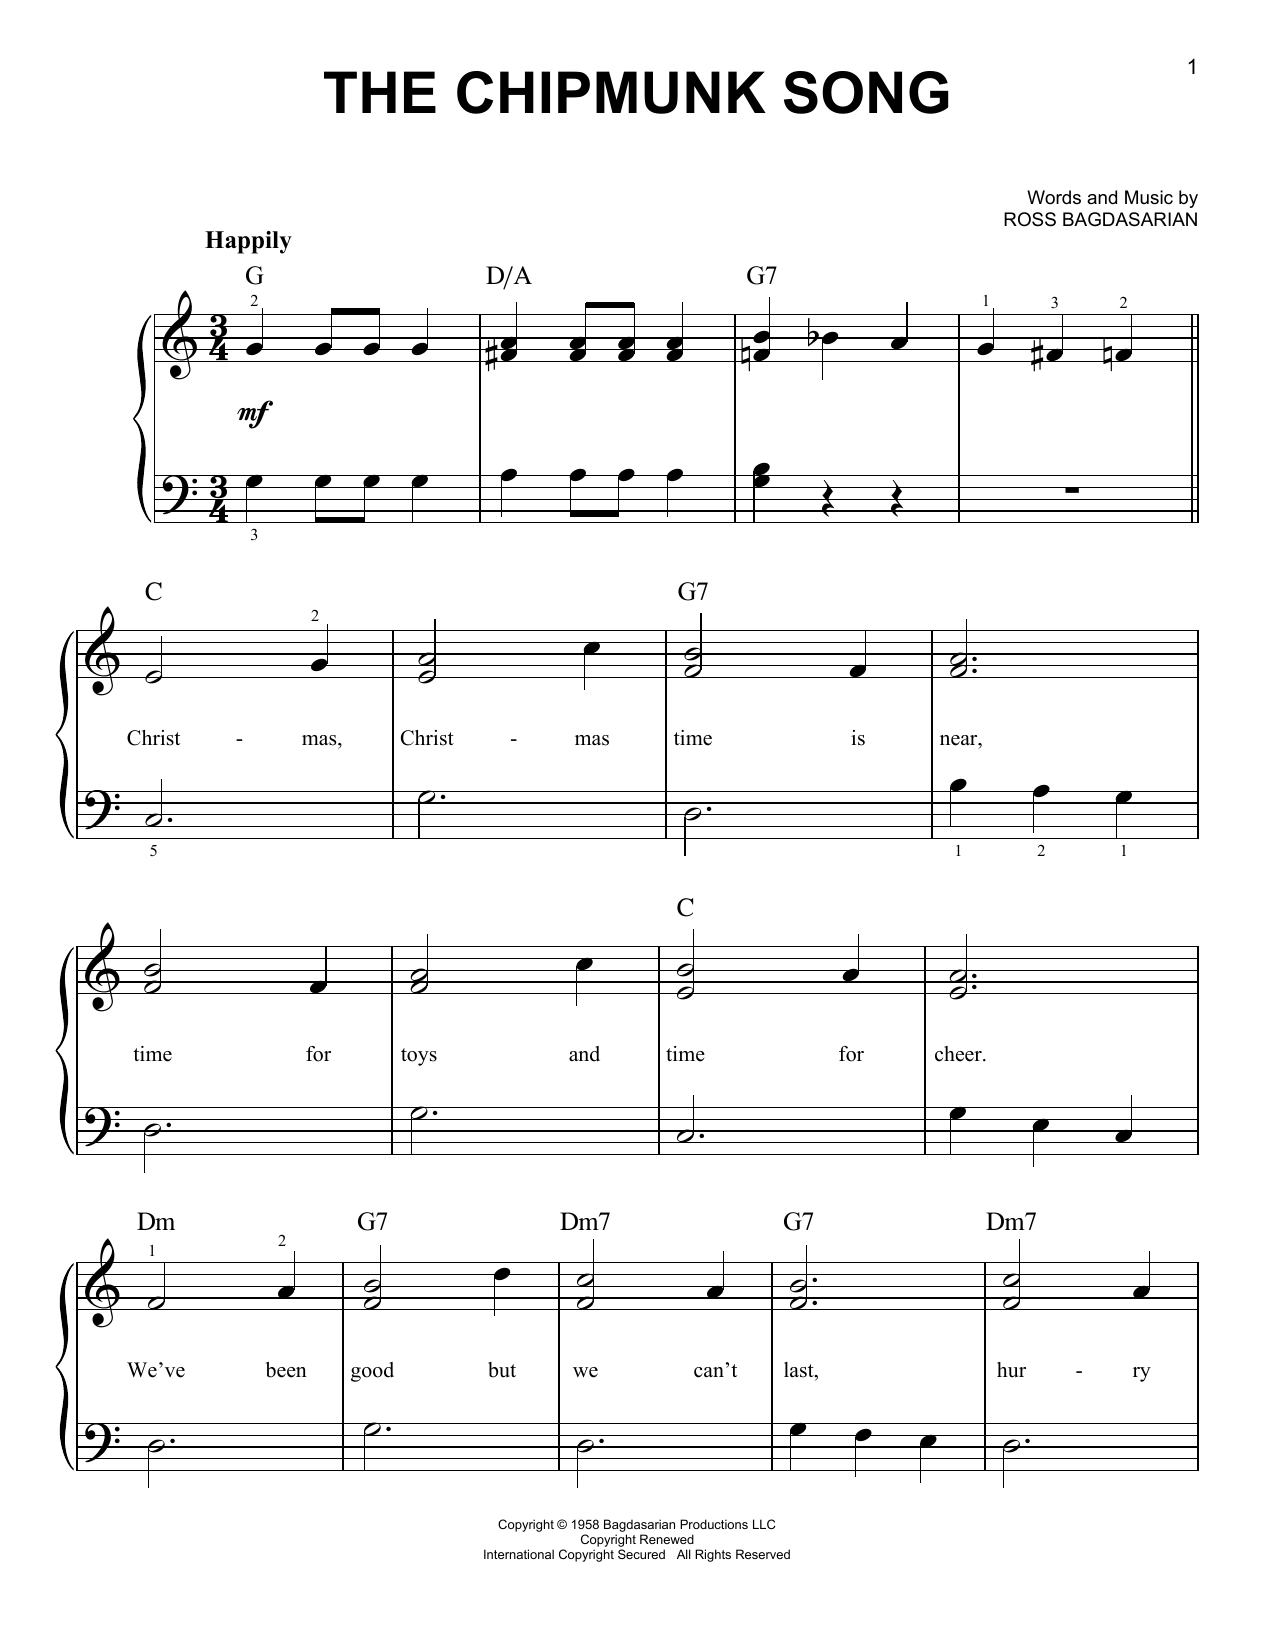 Download Alvin And The Chipmunks The Chipmunk Song Sheet Music